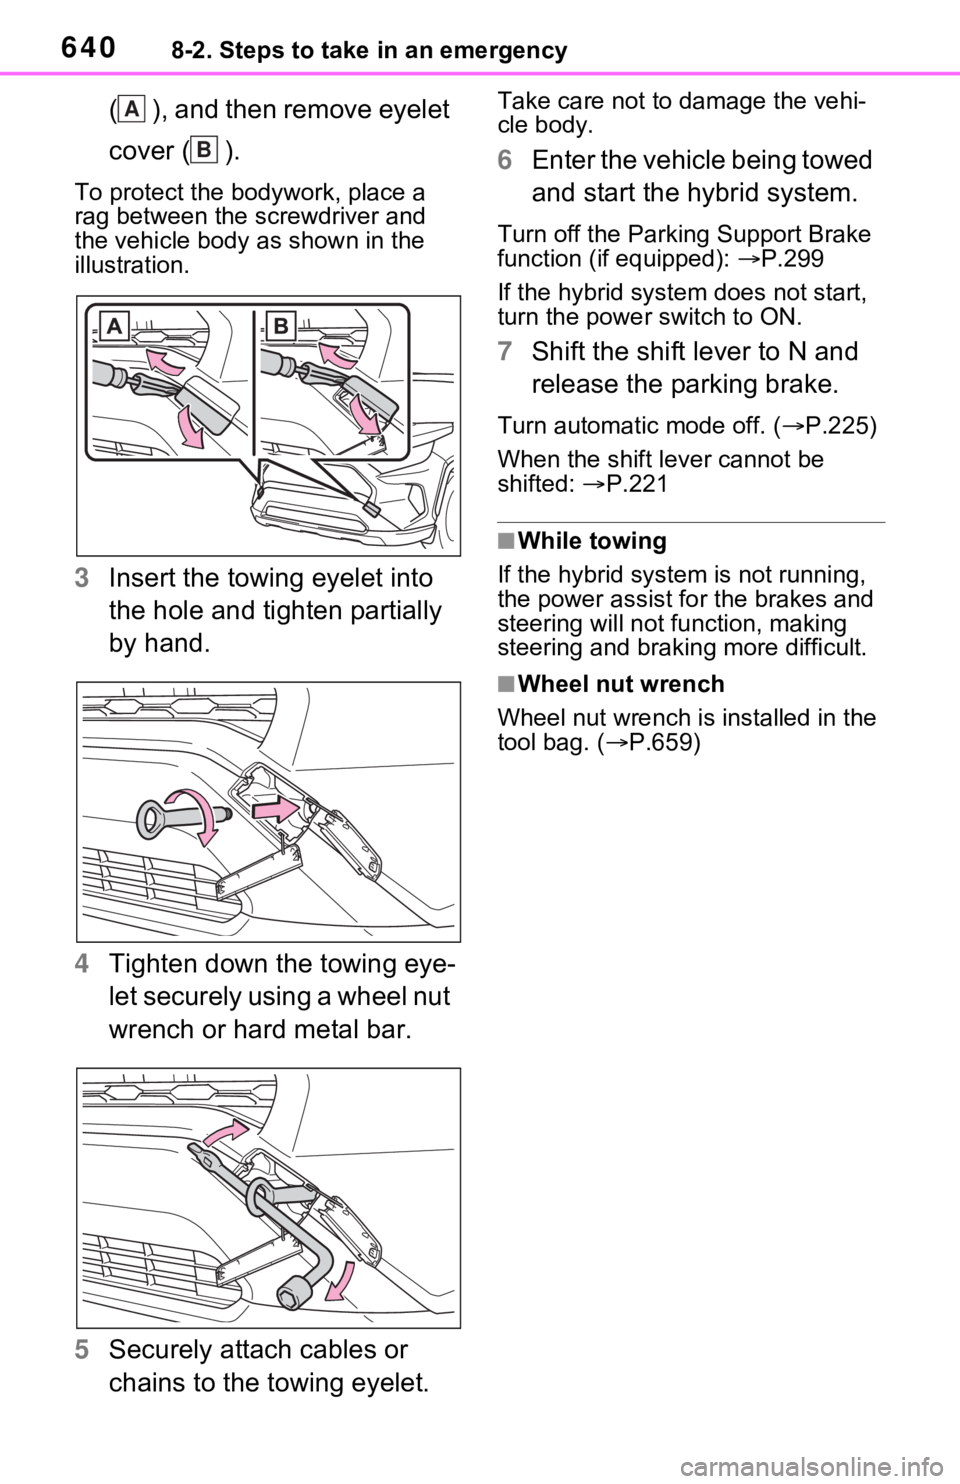 TOYOTA RAV4 HYBRID 2021  Owners Manual (in English) 6408-2. Steps to take in an emergency
( ), and then remove eyelet 
cover ( ).
To protect the bodywork, place a 
rag between the screwdriver and 
the vehicle body as shown in the 
illustration.
3Insert